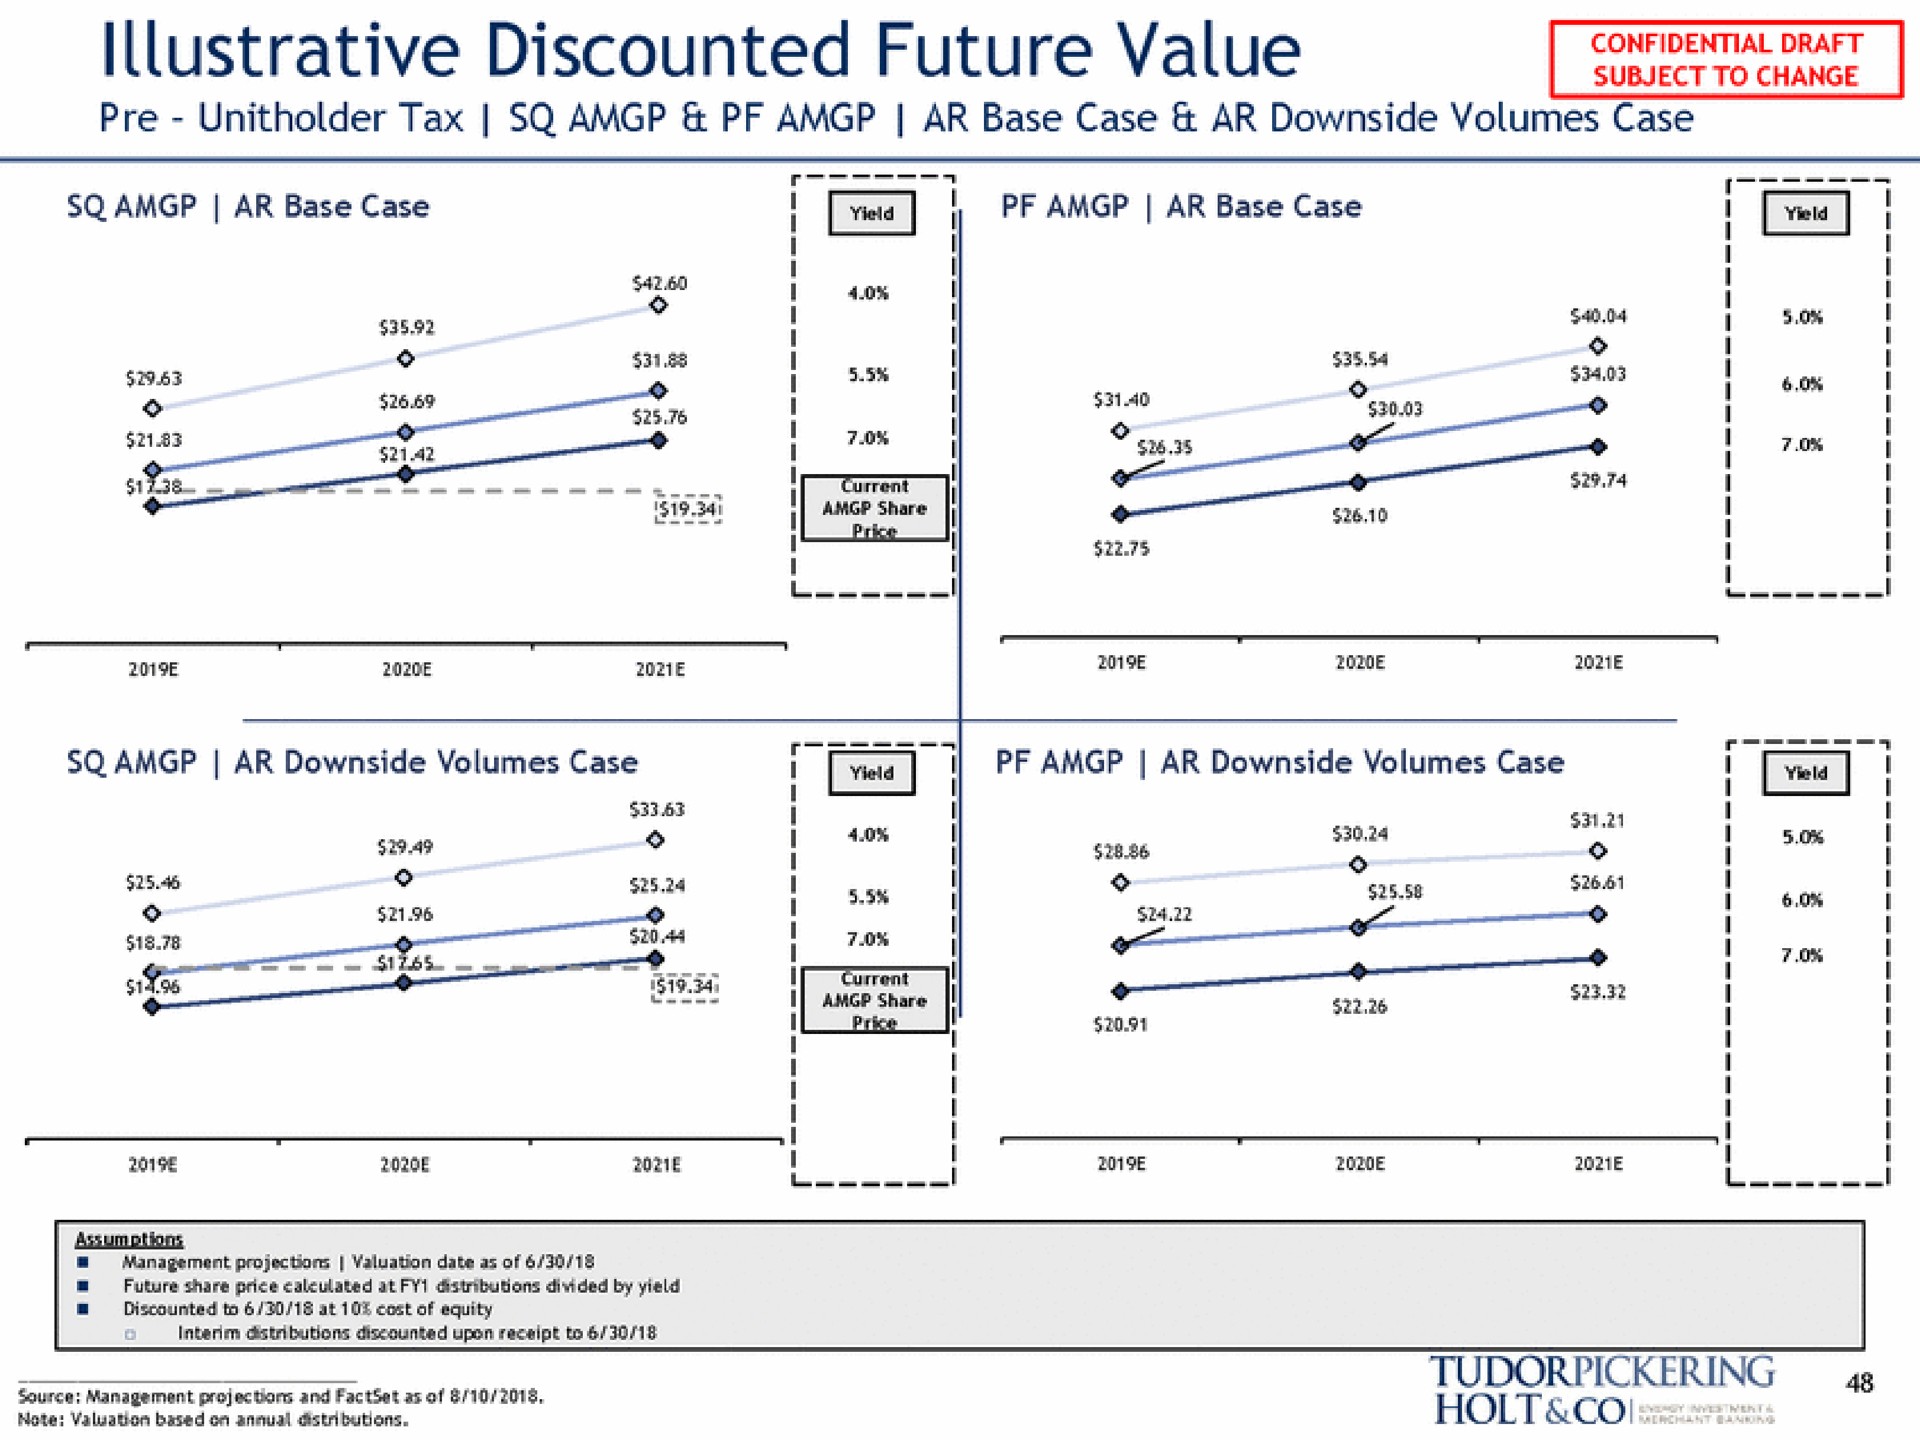 illustrative discounted future value a note based holt | Tudor, Pickering, Holt & Co